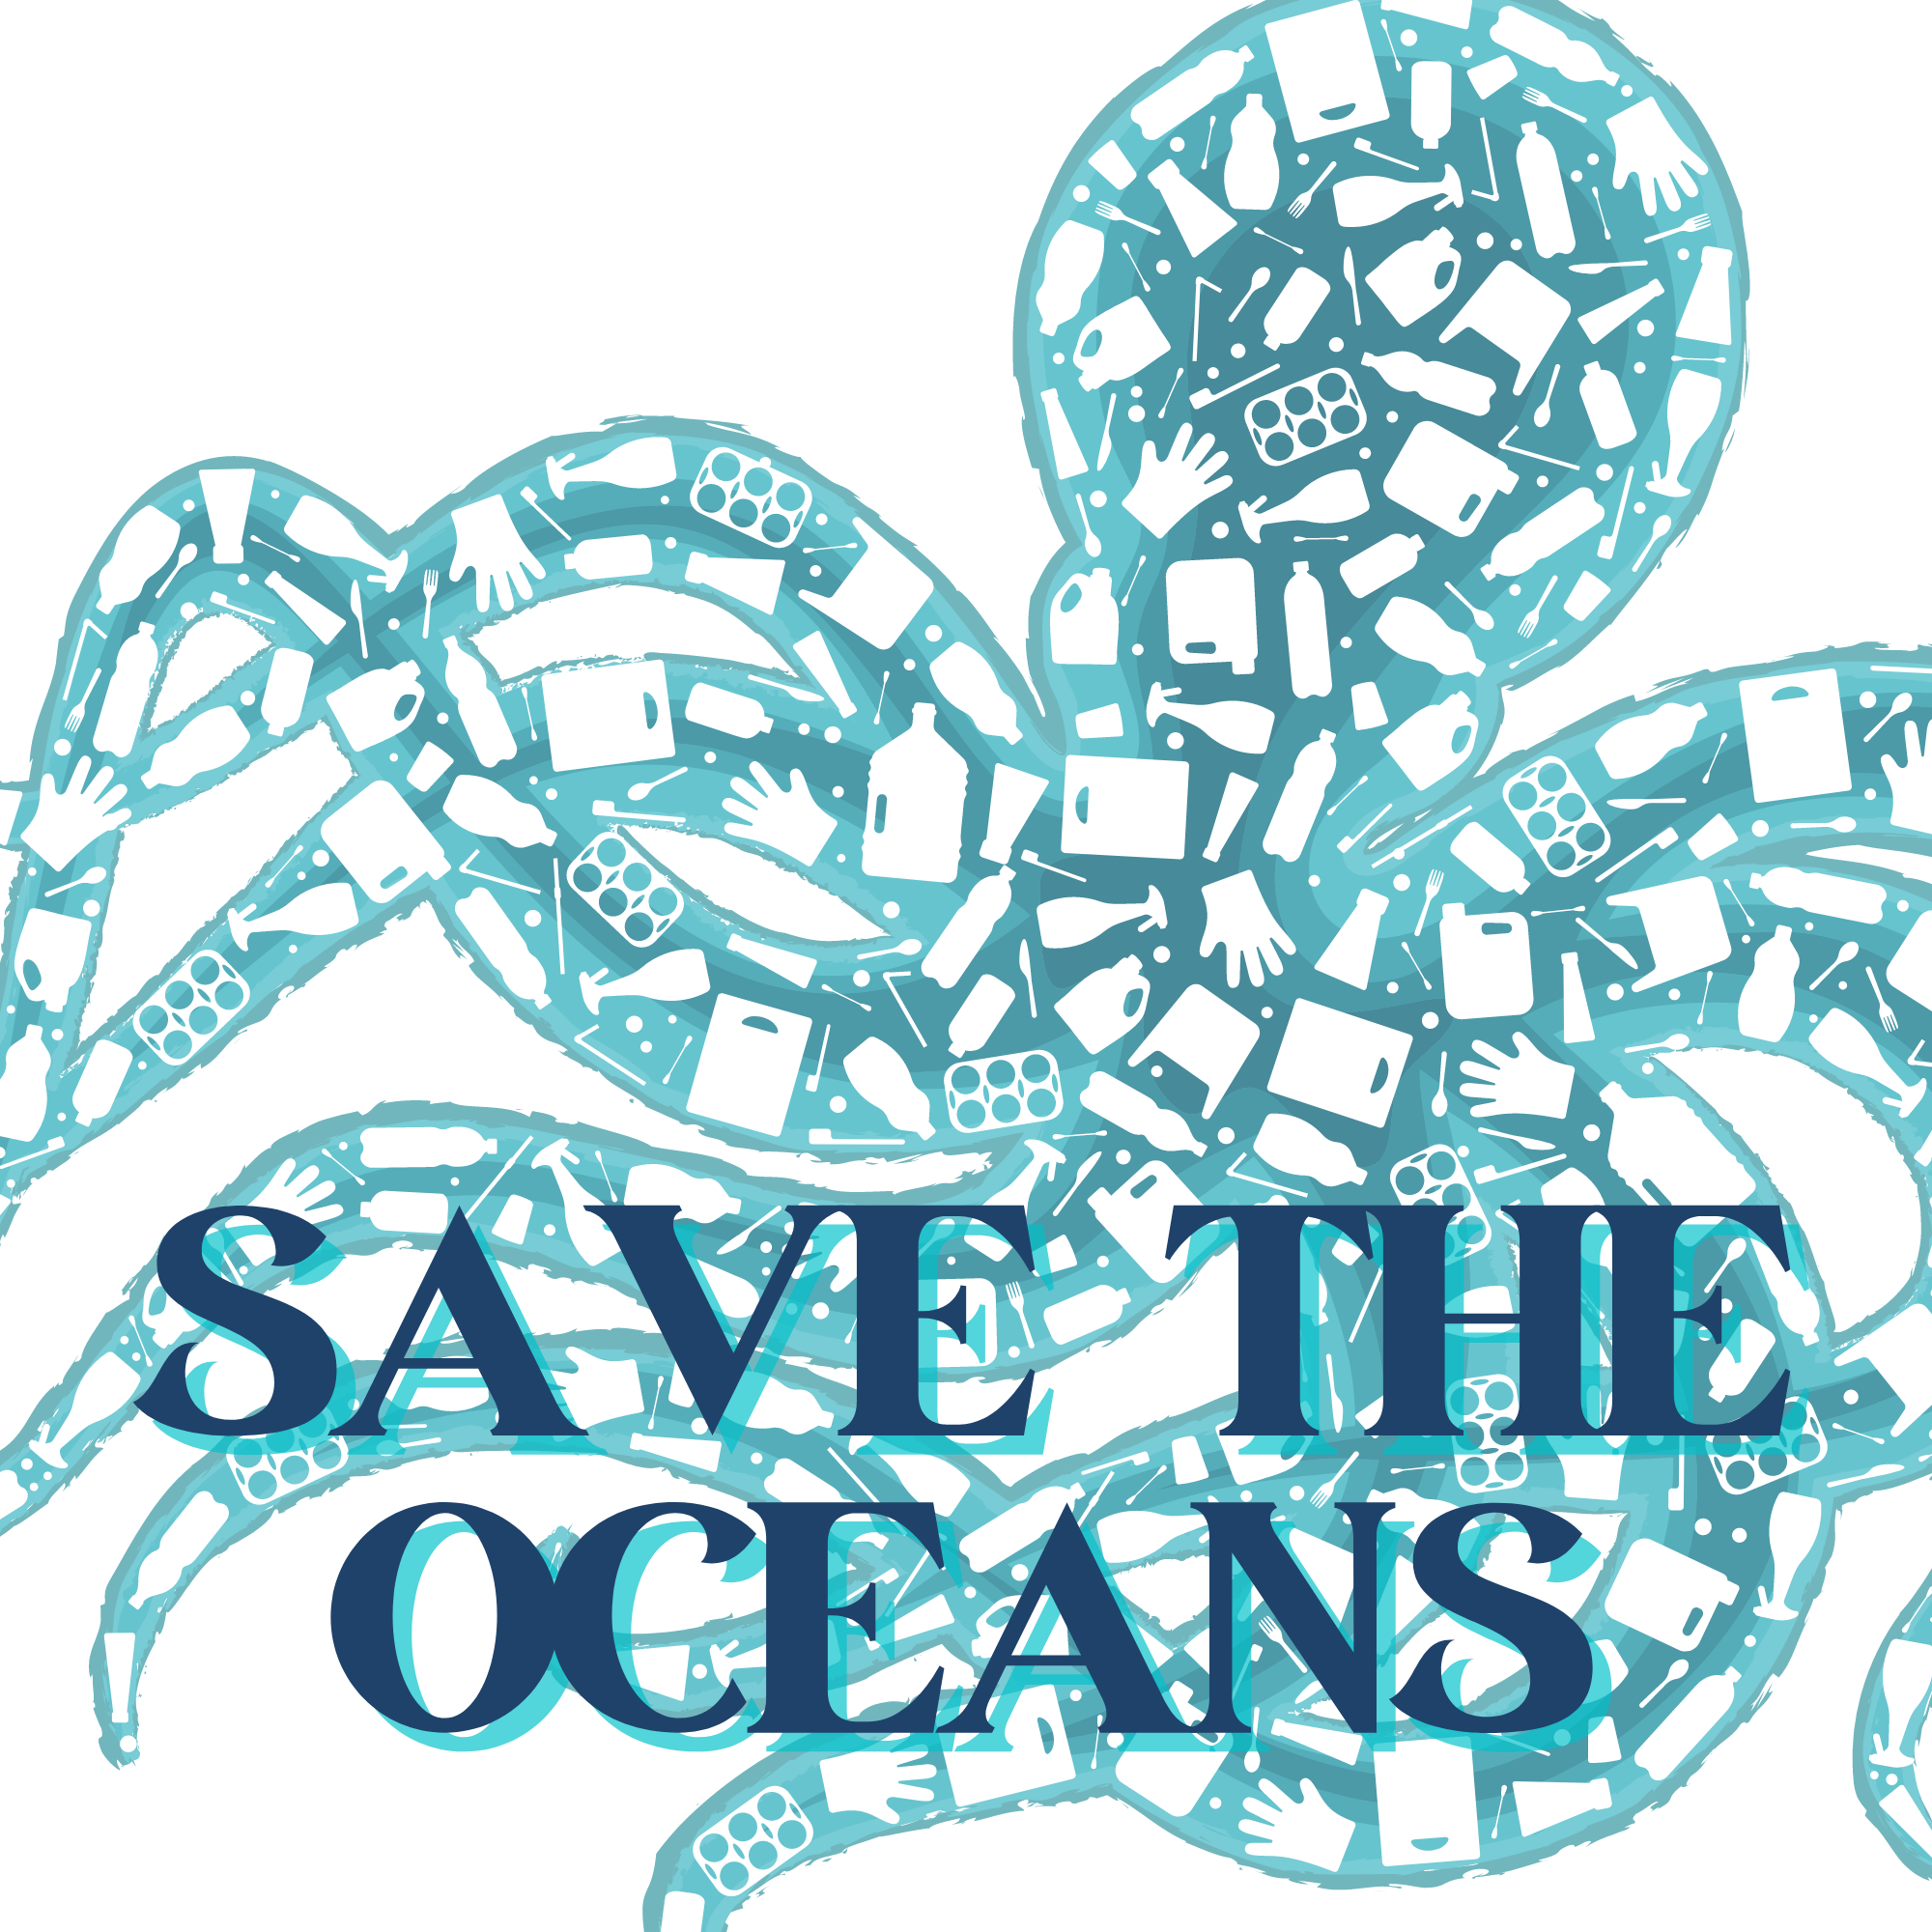 Save the Oceans with an octopus